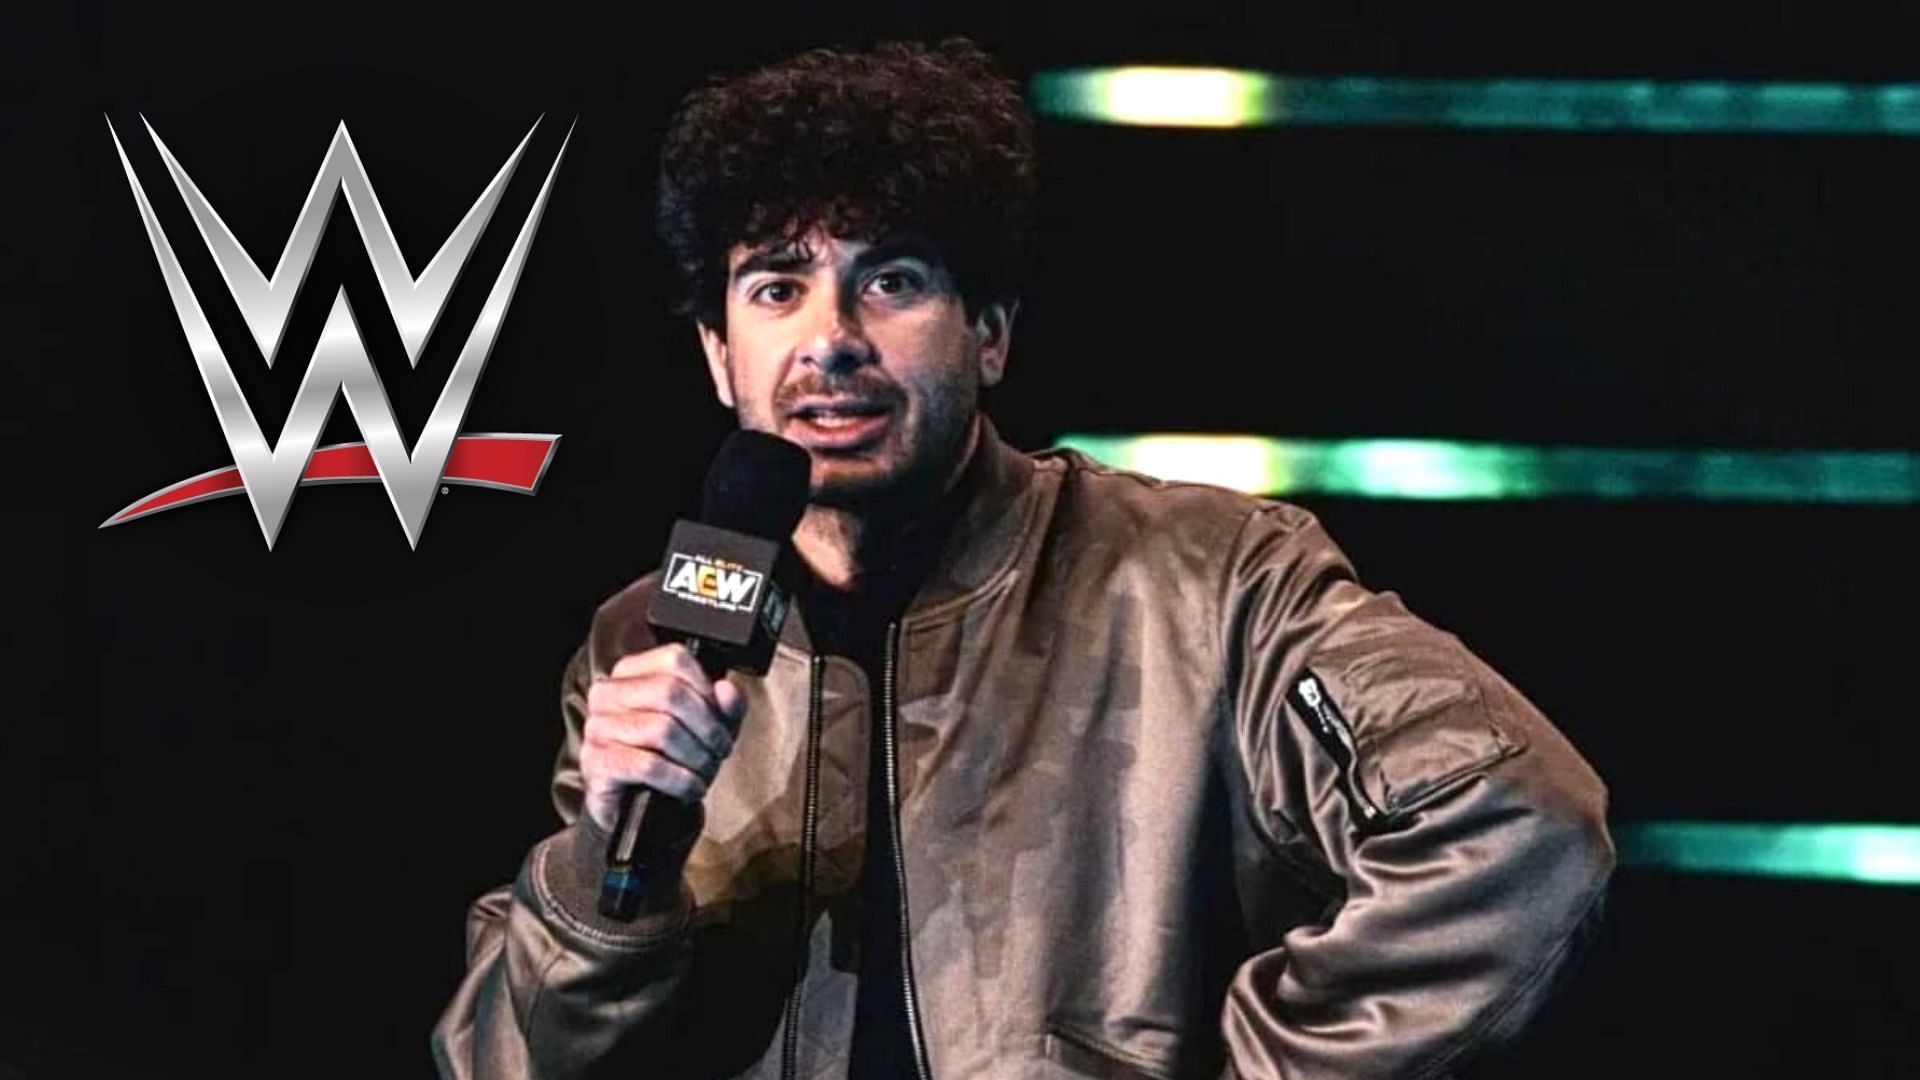 Tony Khan recently received some advice from a WWE veteran